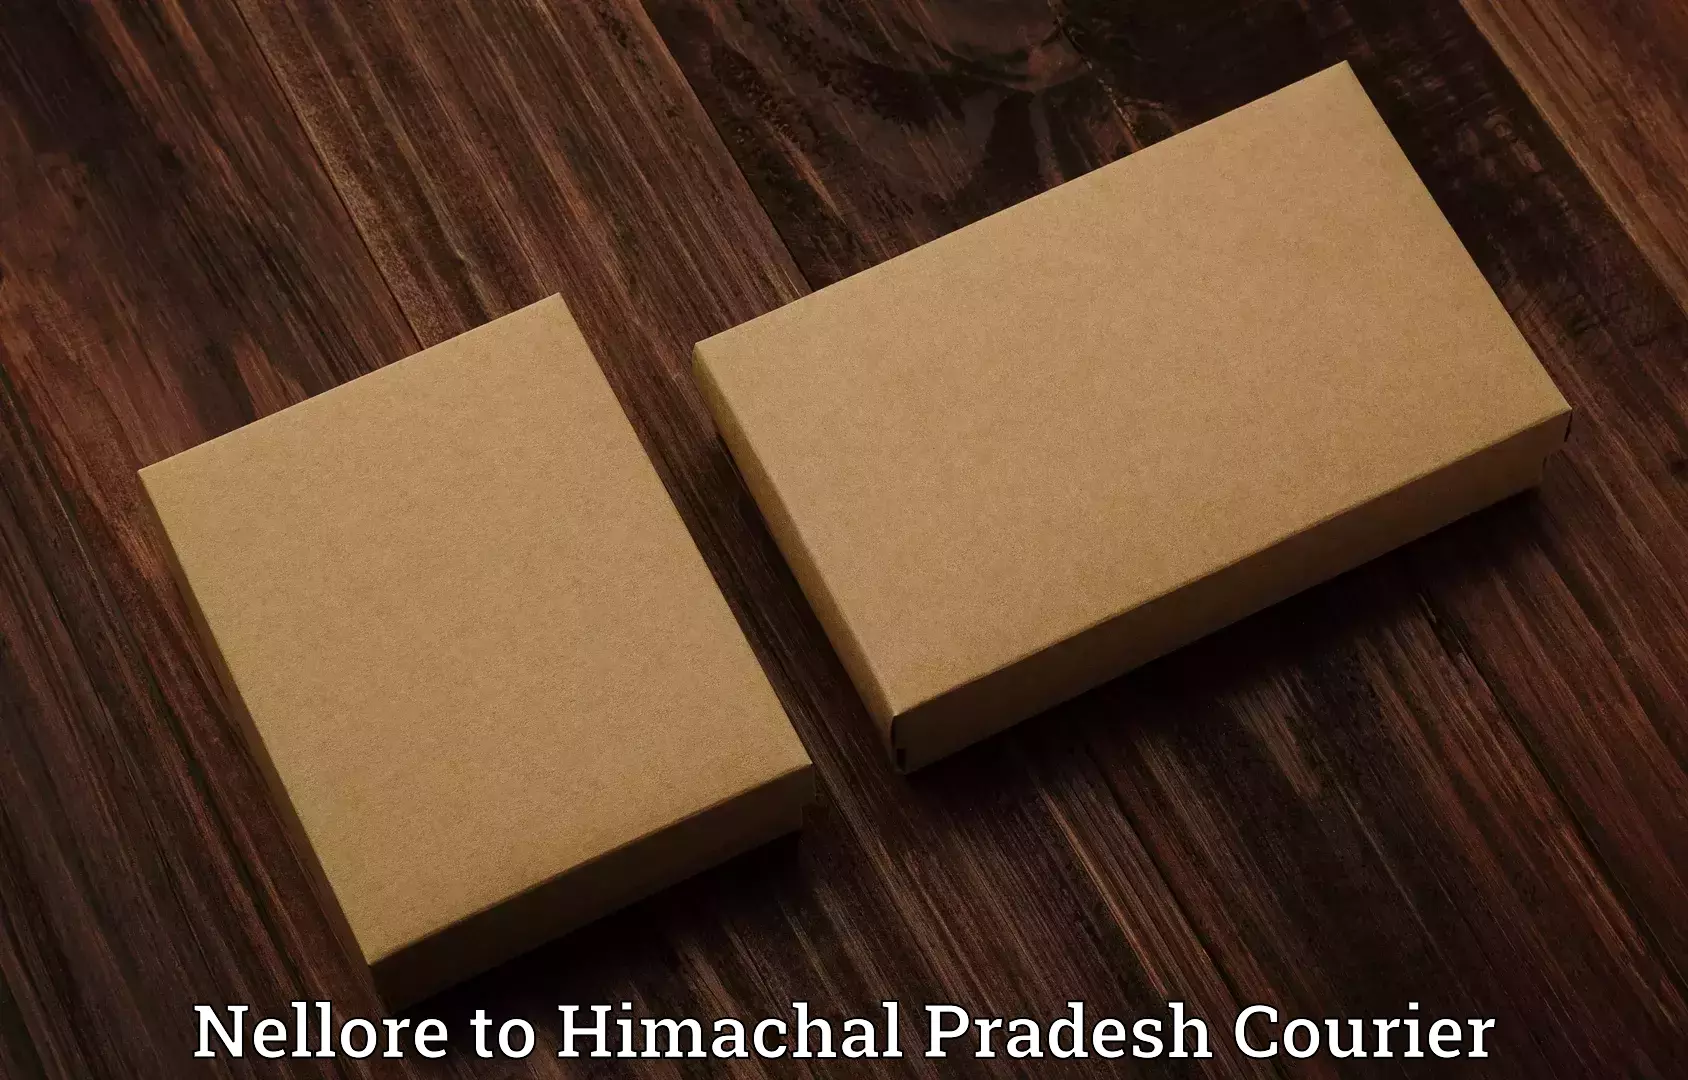 Personal effects shipping Nellore to Kotkhai